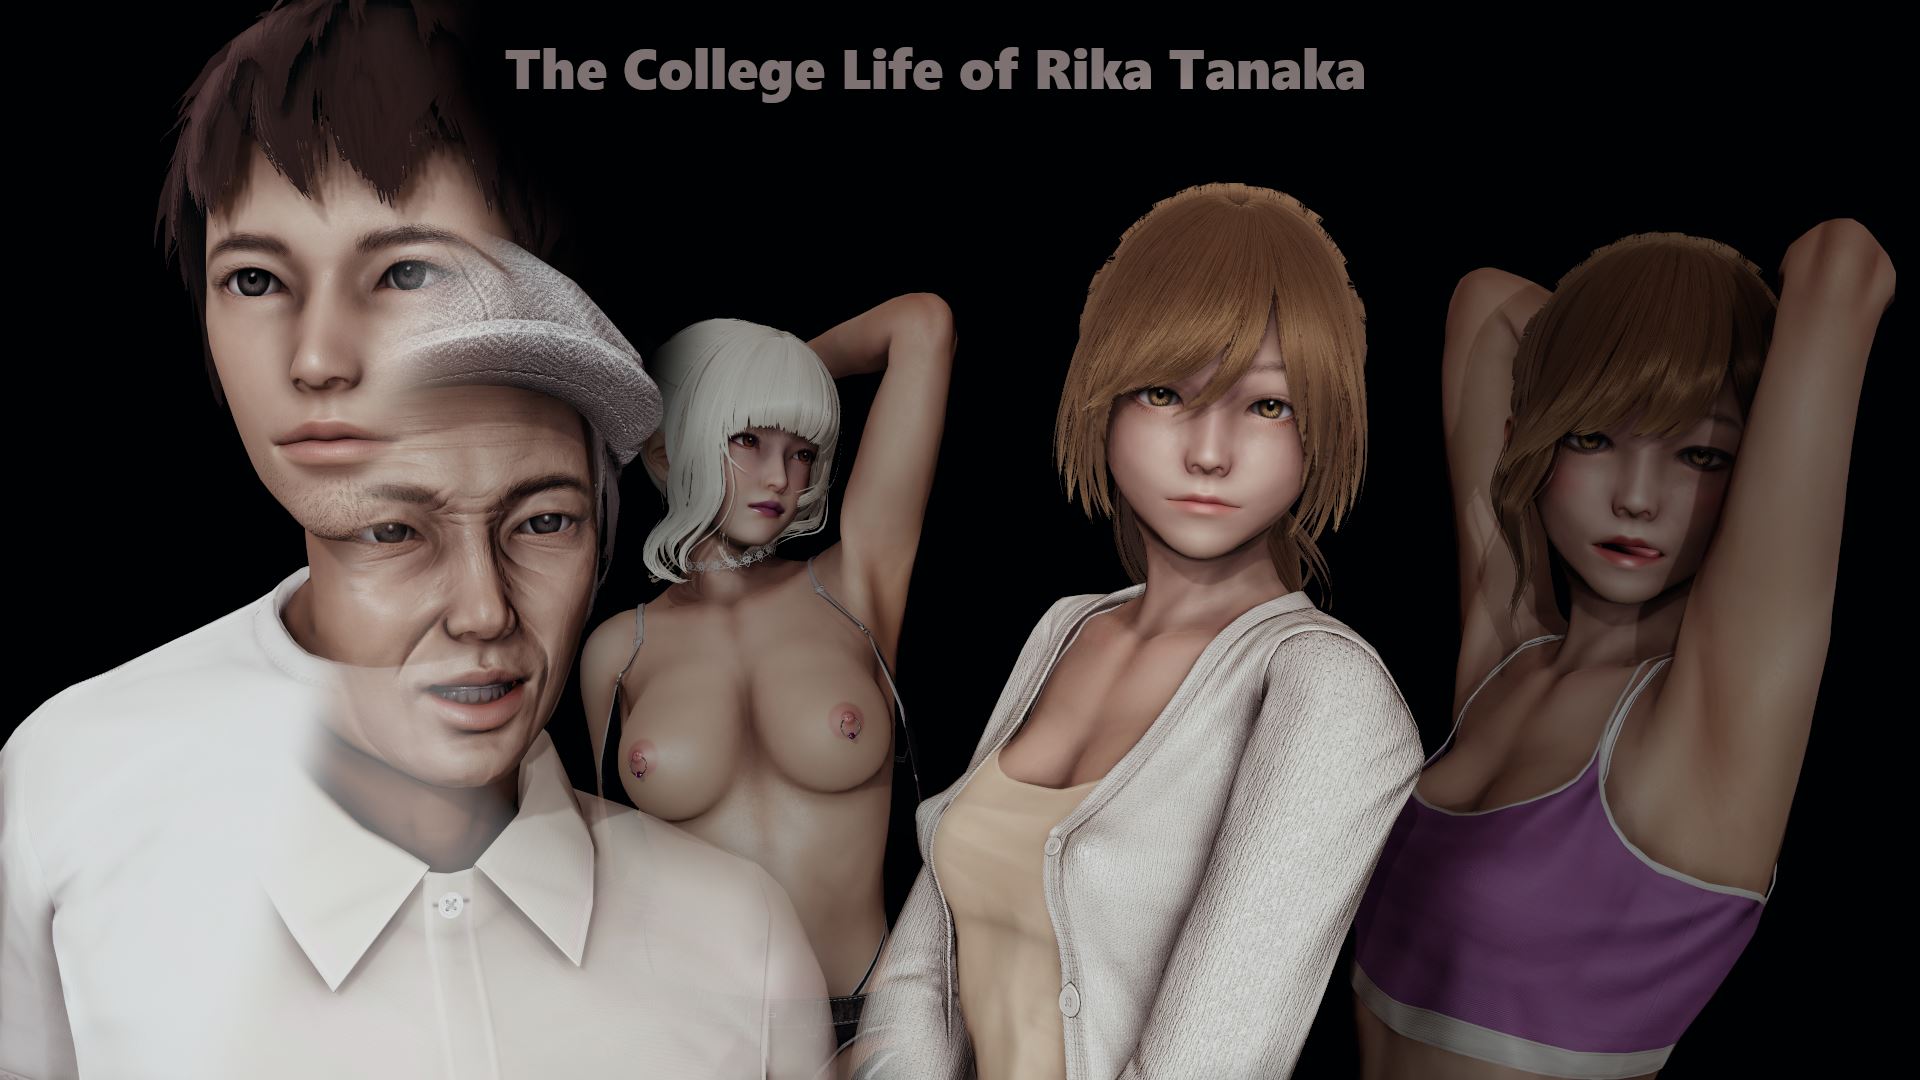 Rika goes to art school [Ongoing] - Version: 0.4